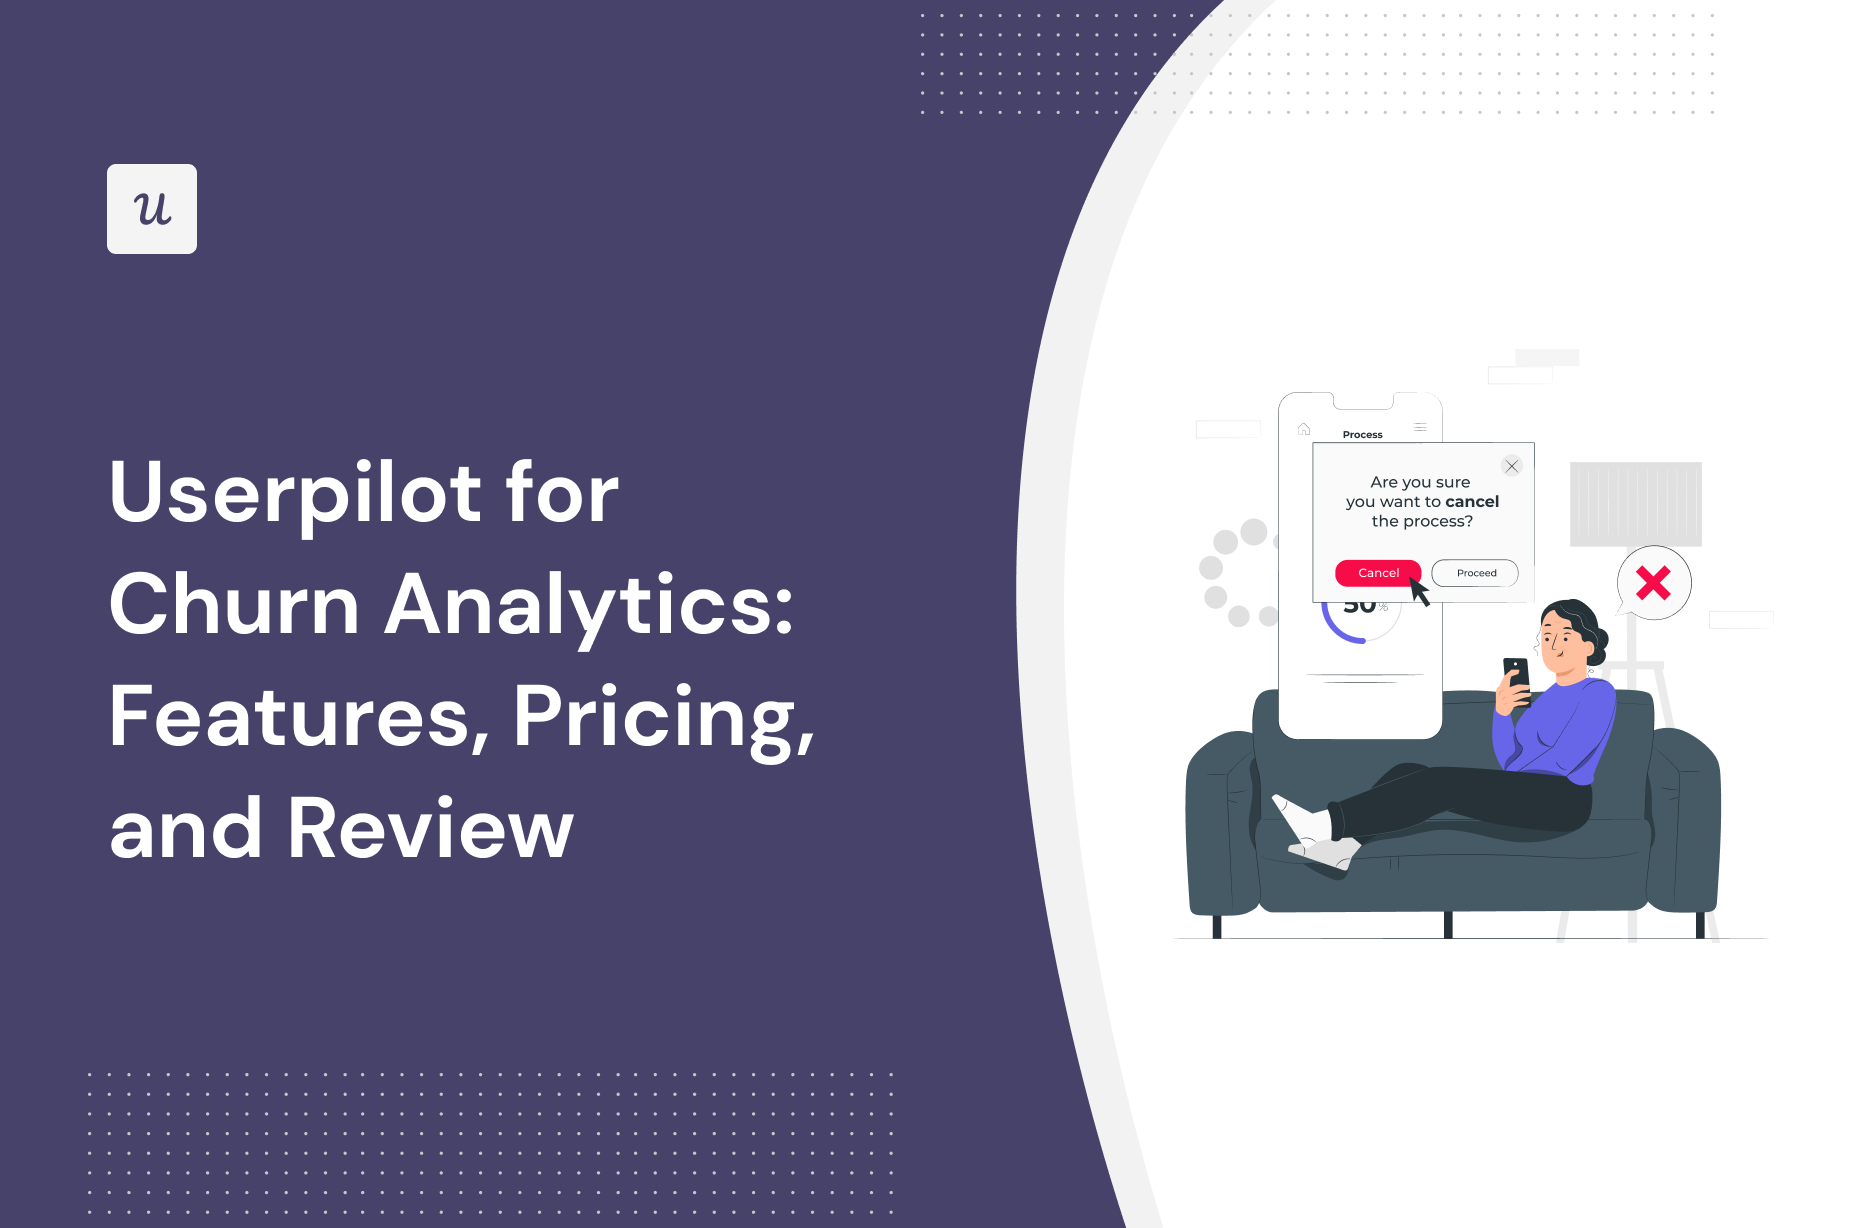 Userpilot for Churn Analytics: Features, Pricing, and Review